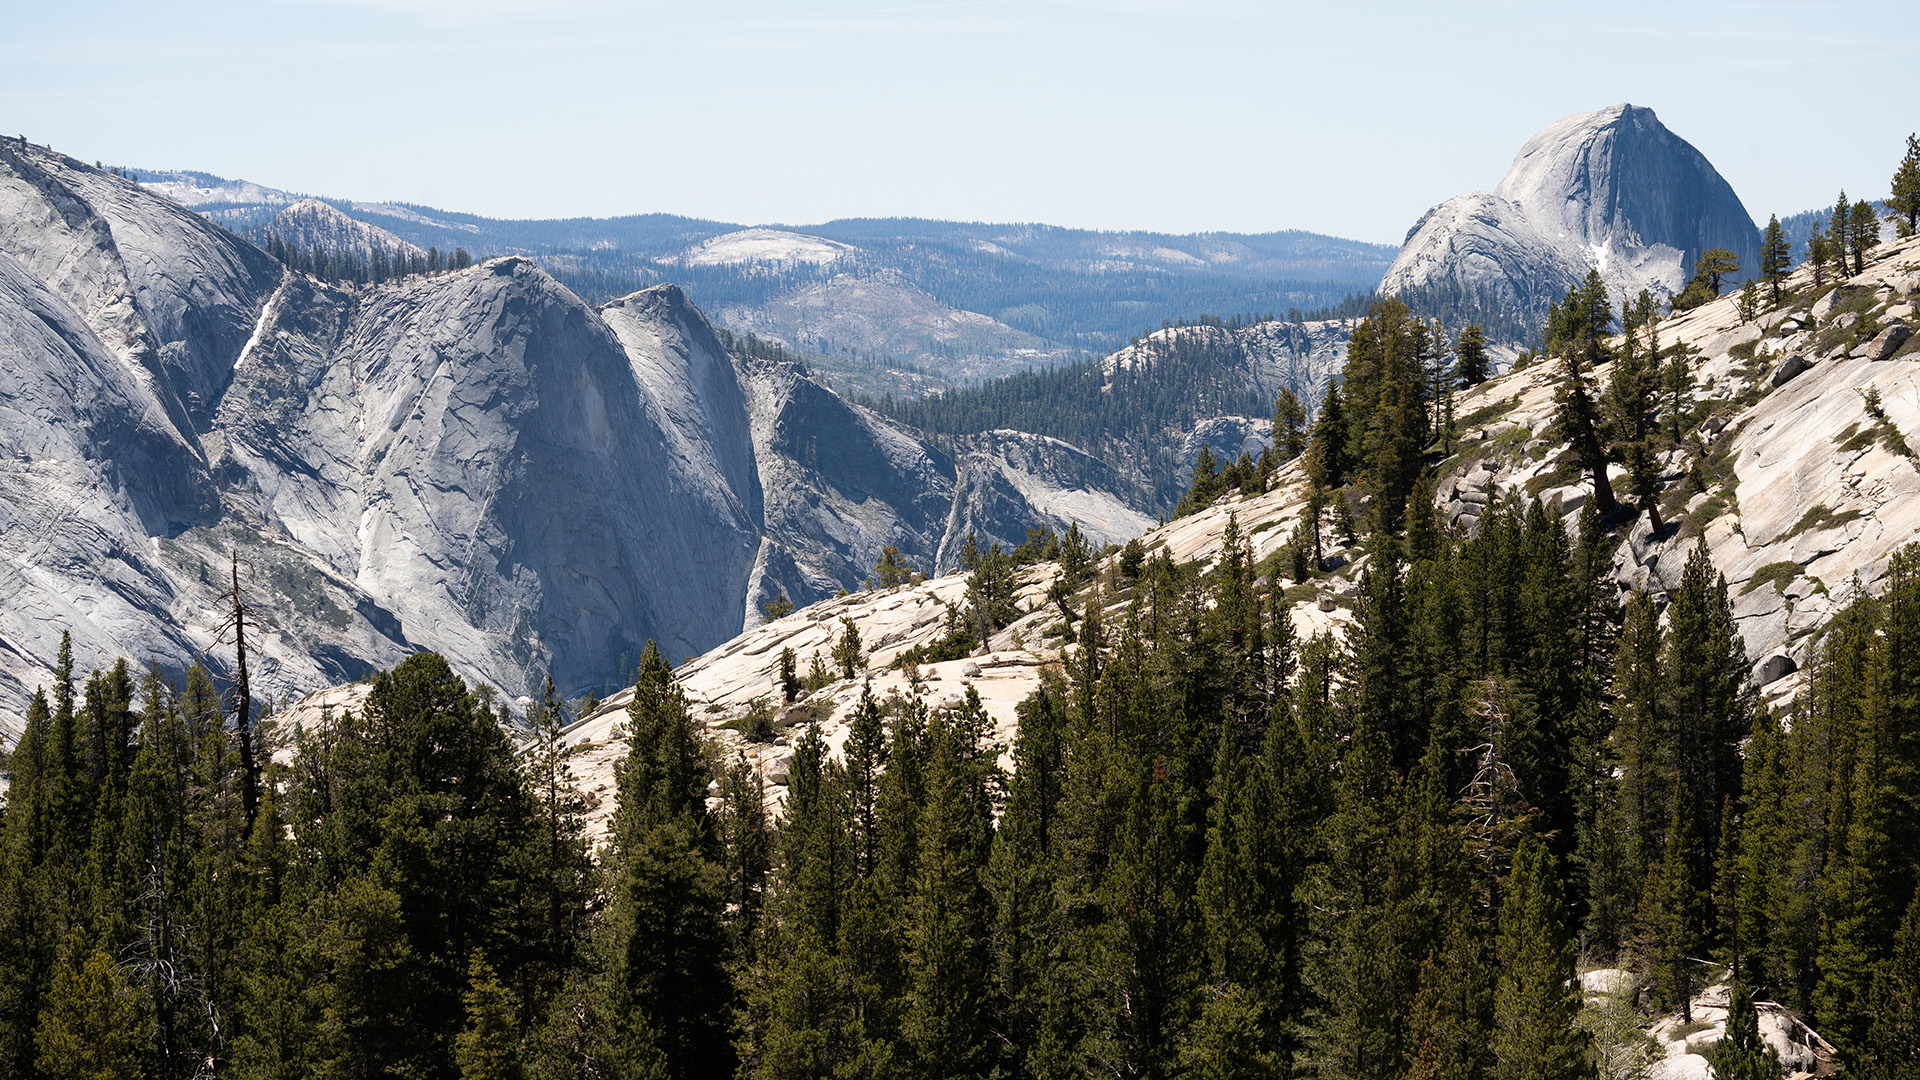 View of Half Dome taken from Olmstead Point. This is from America's National Parks. [Photo of the day - September 2022]